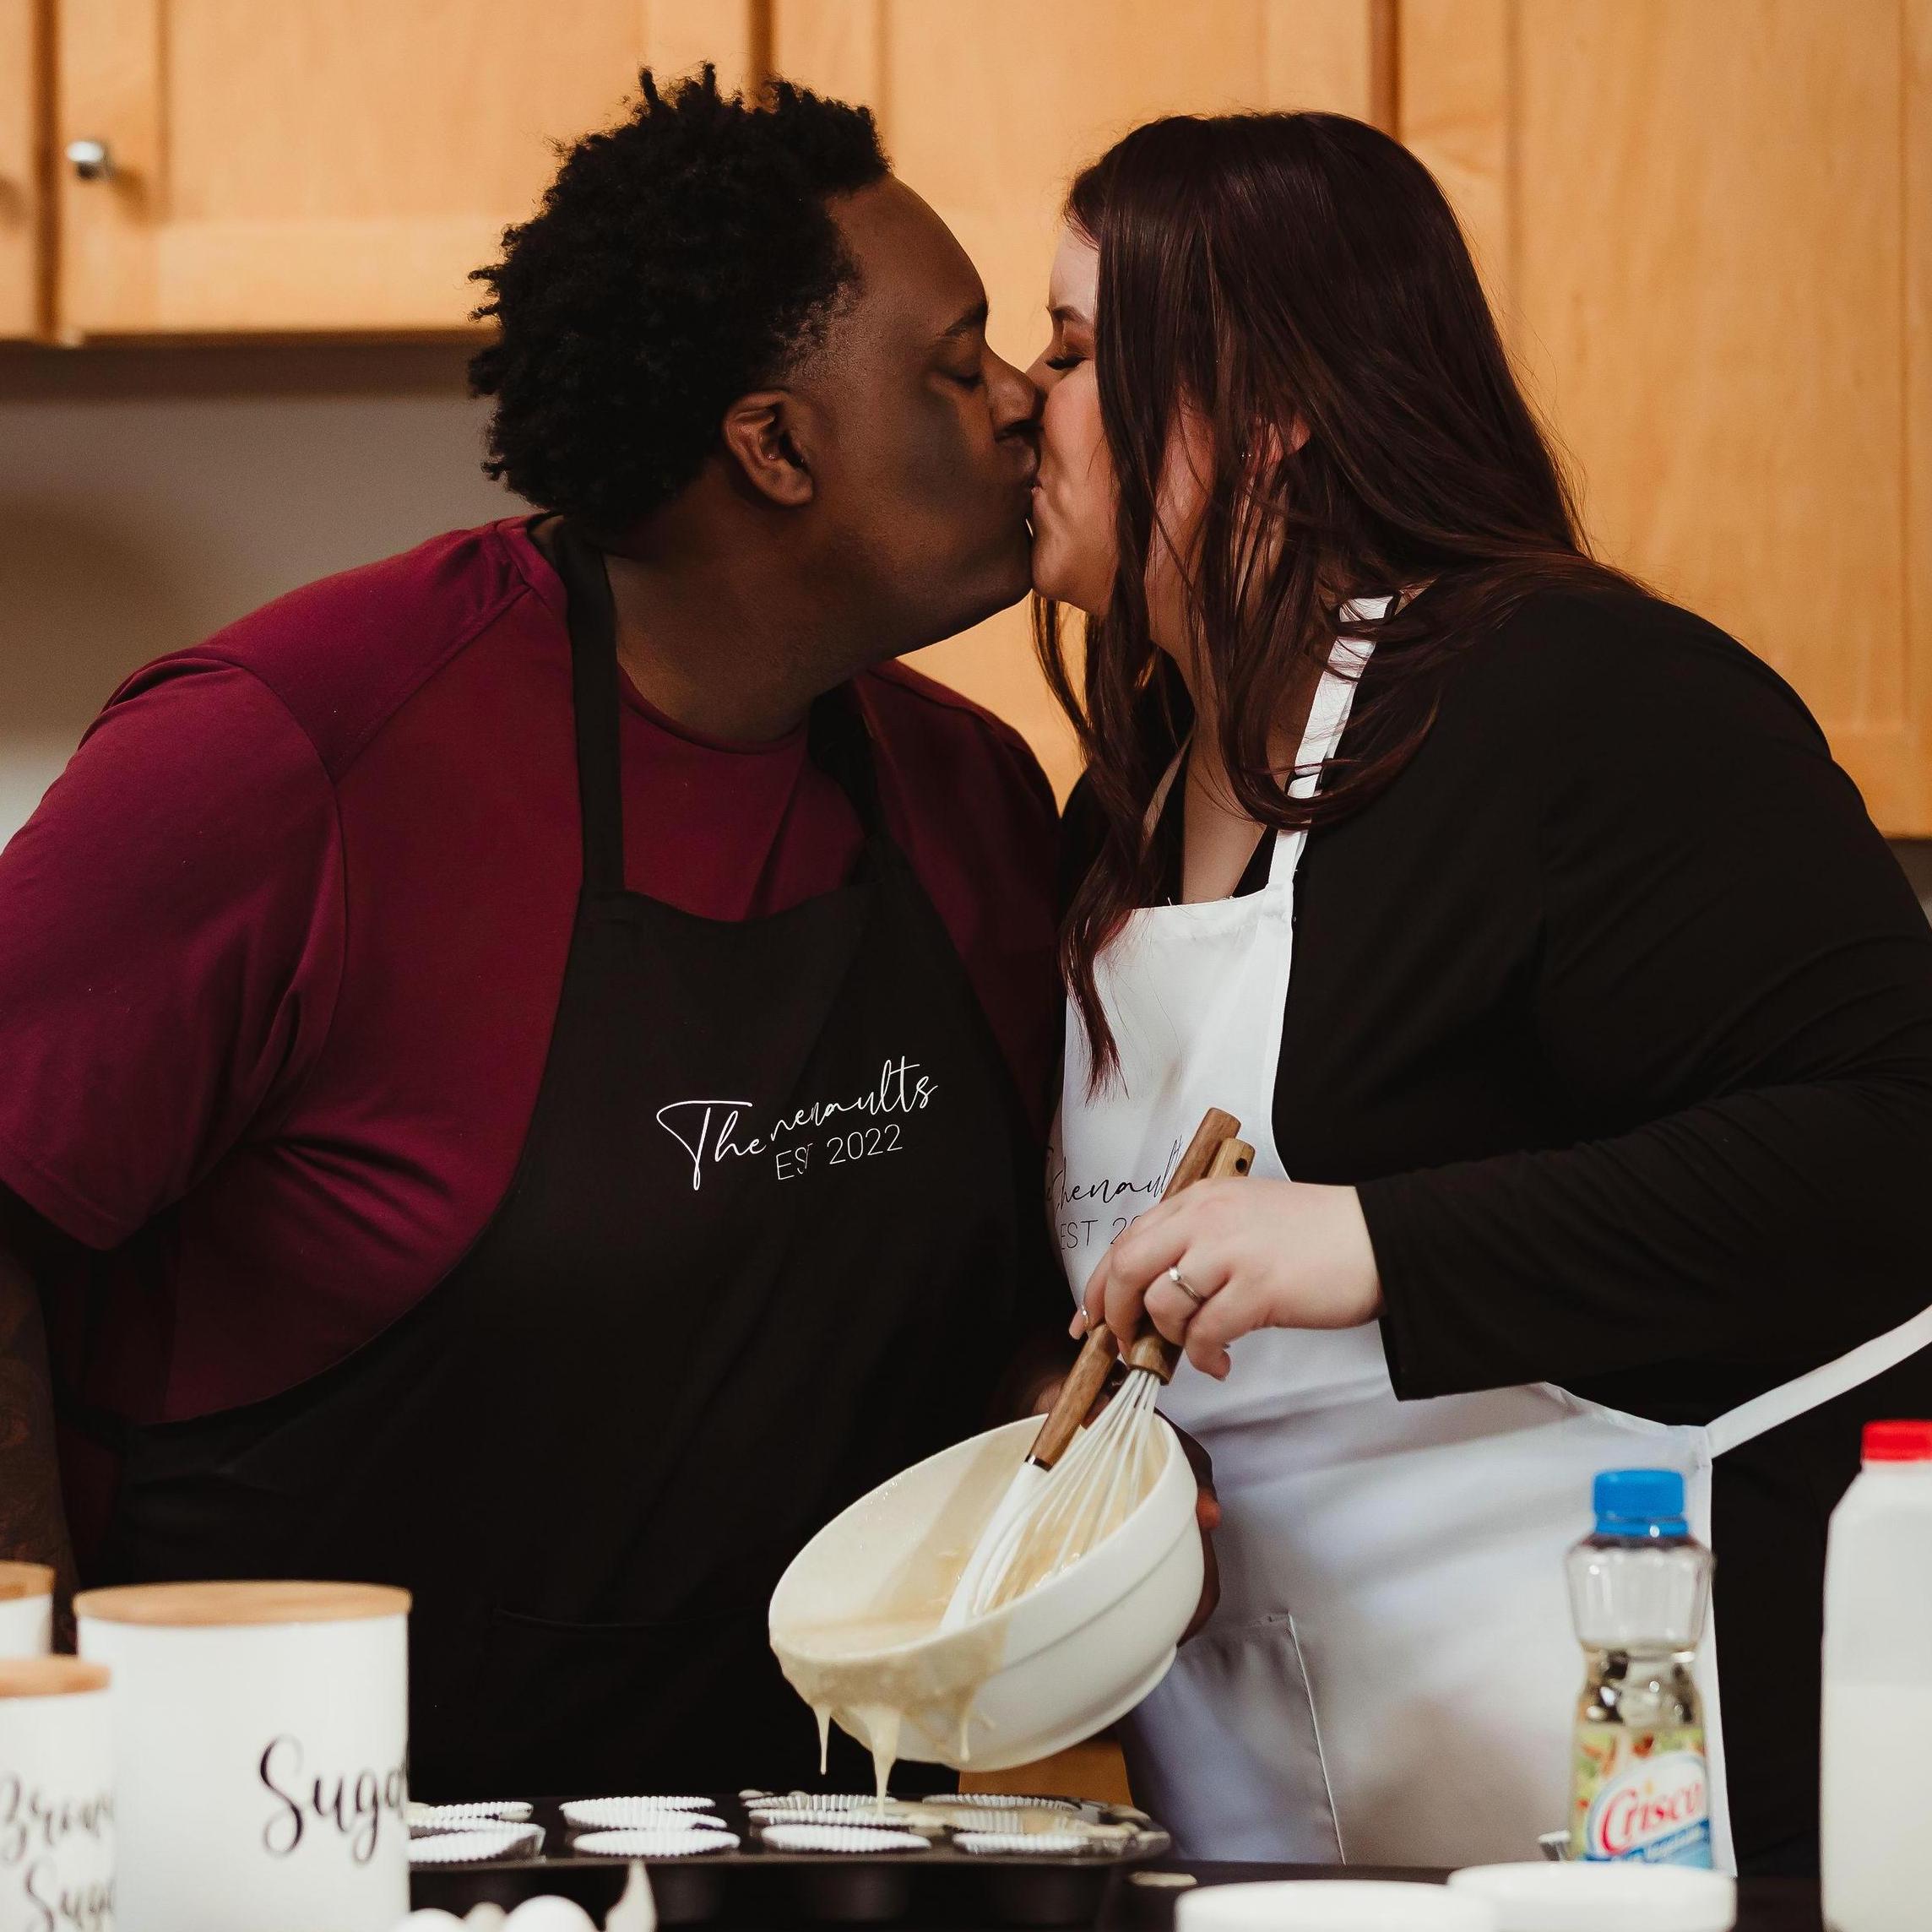 Our photographer is amazing and had such a fun idea of incorporating baking into our engagement shoot!